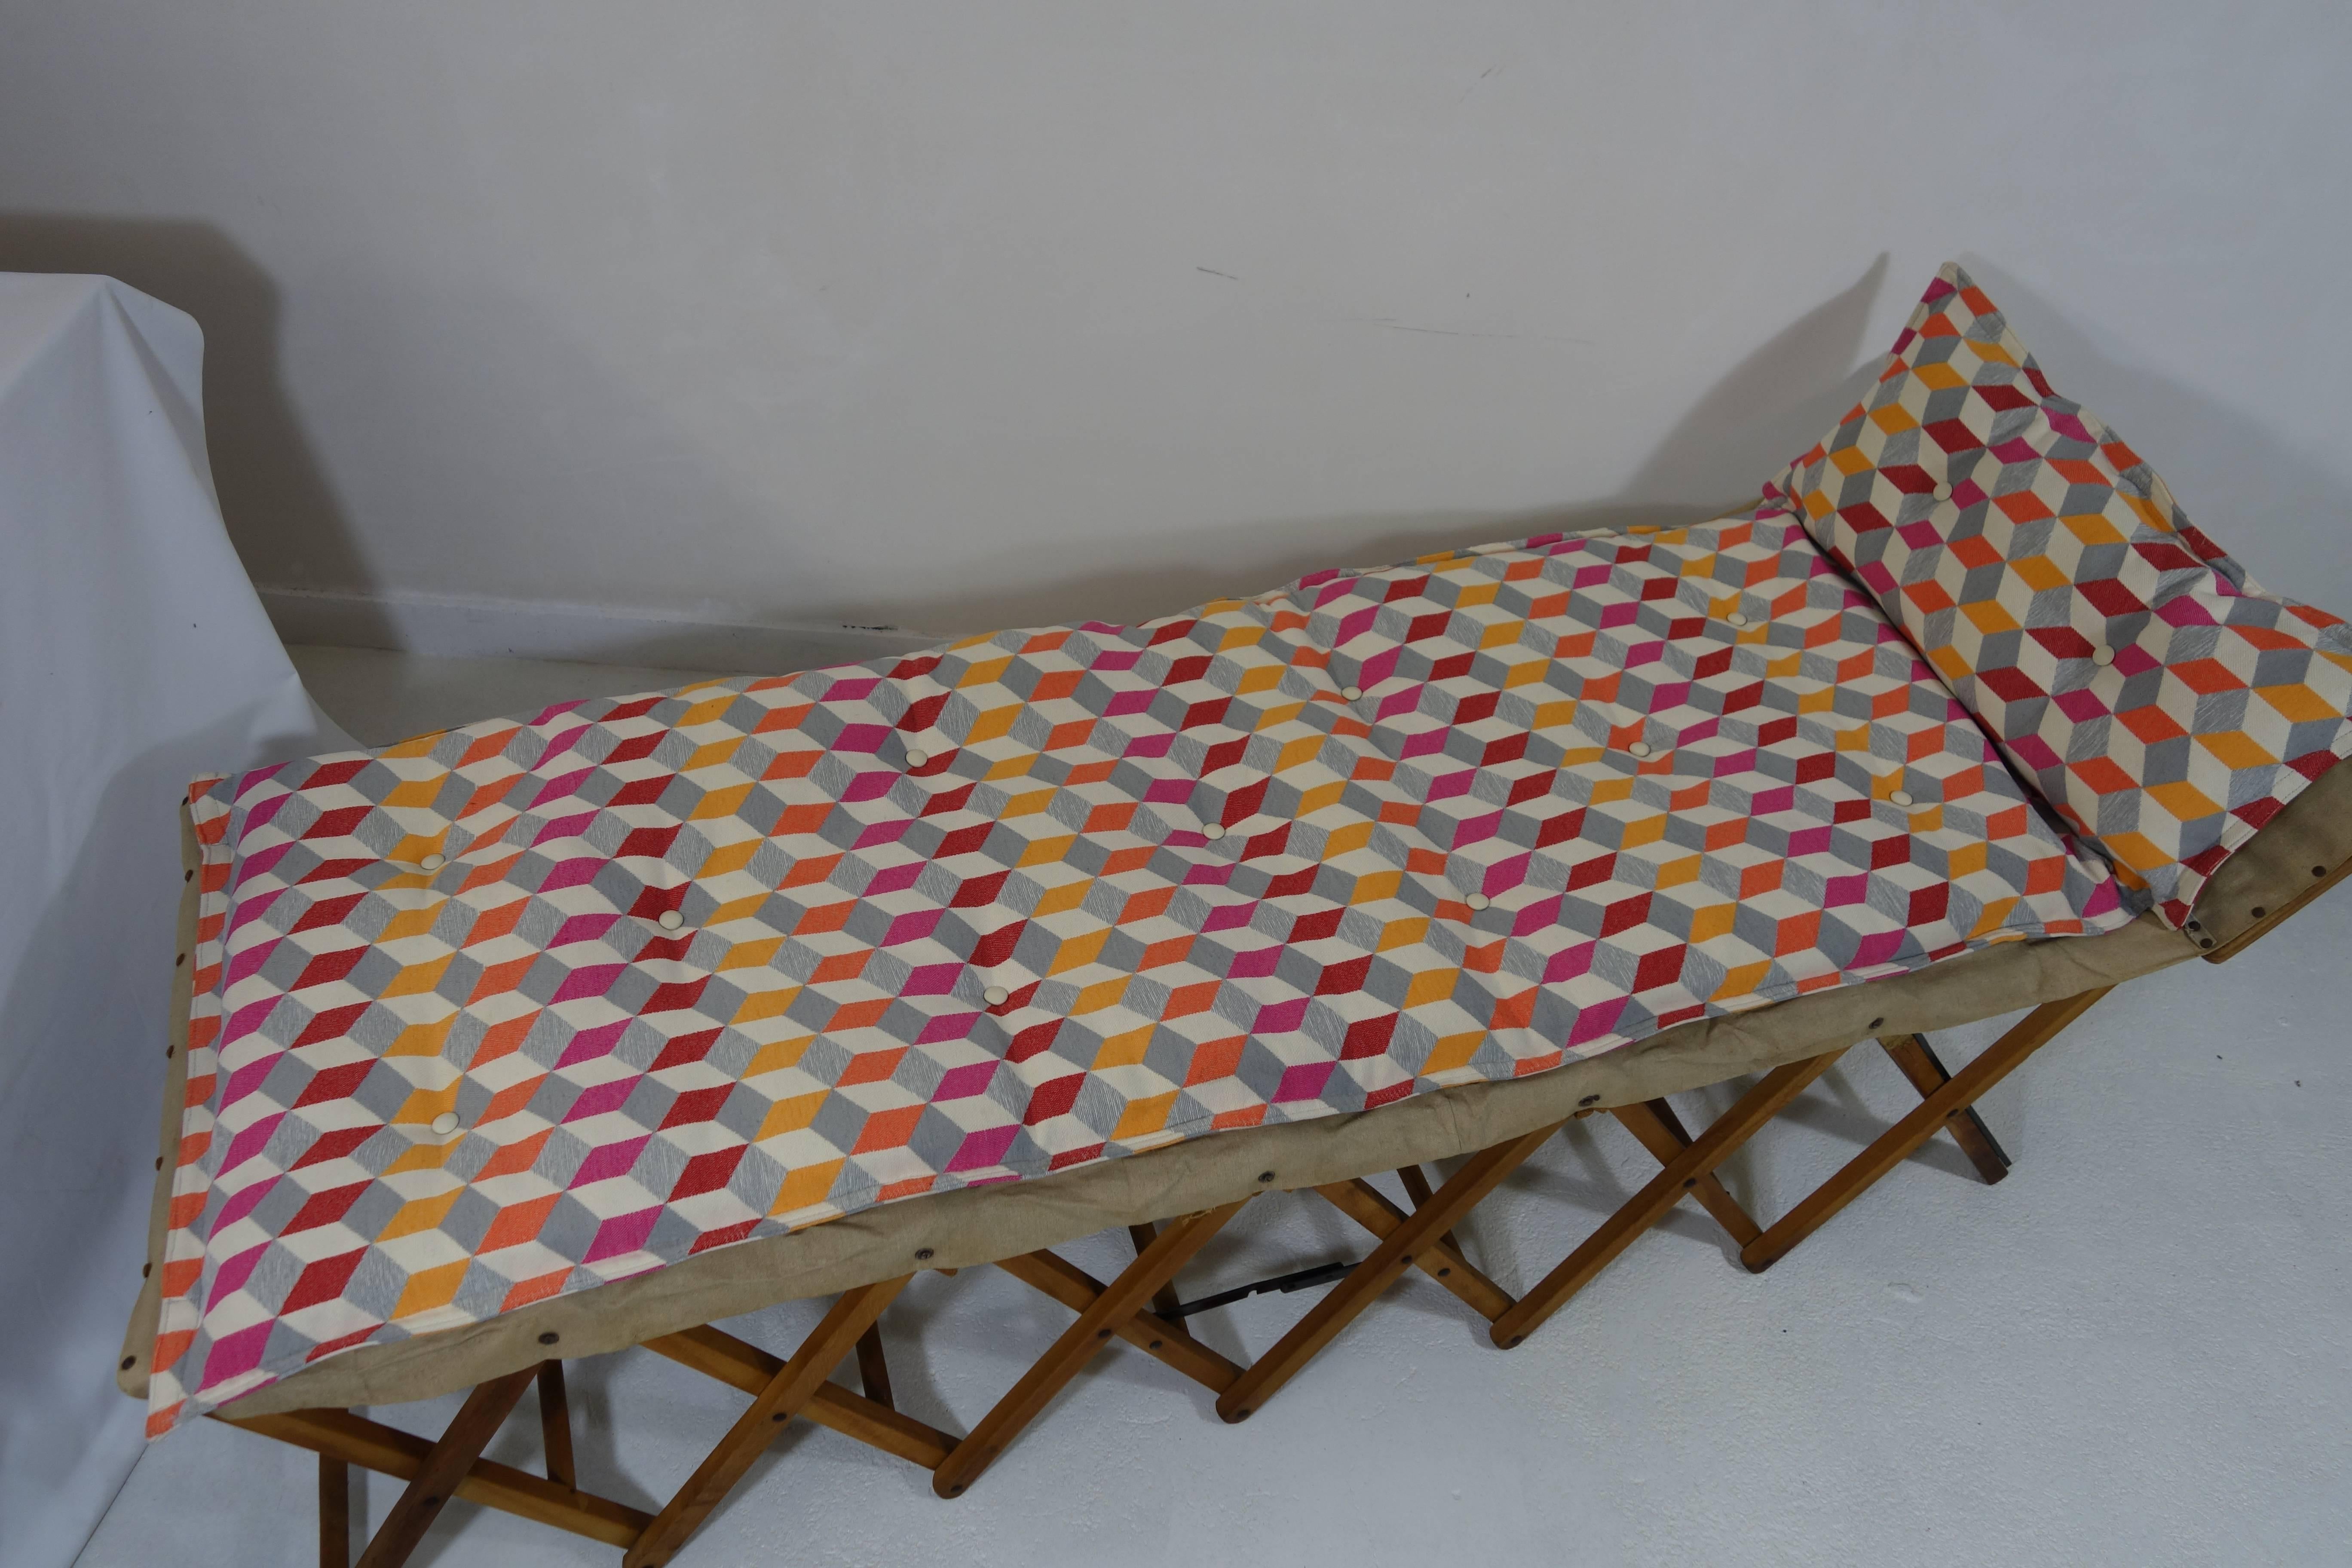 Beautiful foldable day bed made of wood and canvas. 
When folded it may serve as an occasional table. 
Its dimensions then are 55 cm high, 74 cm wide and 25 deep.
The cushion that comes with it is new. It was custom made to fit the shape of the